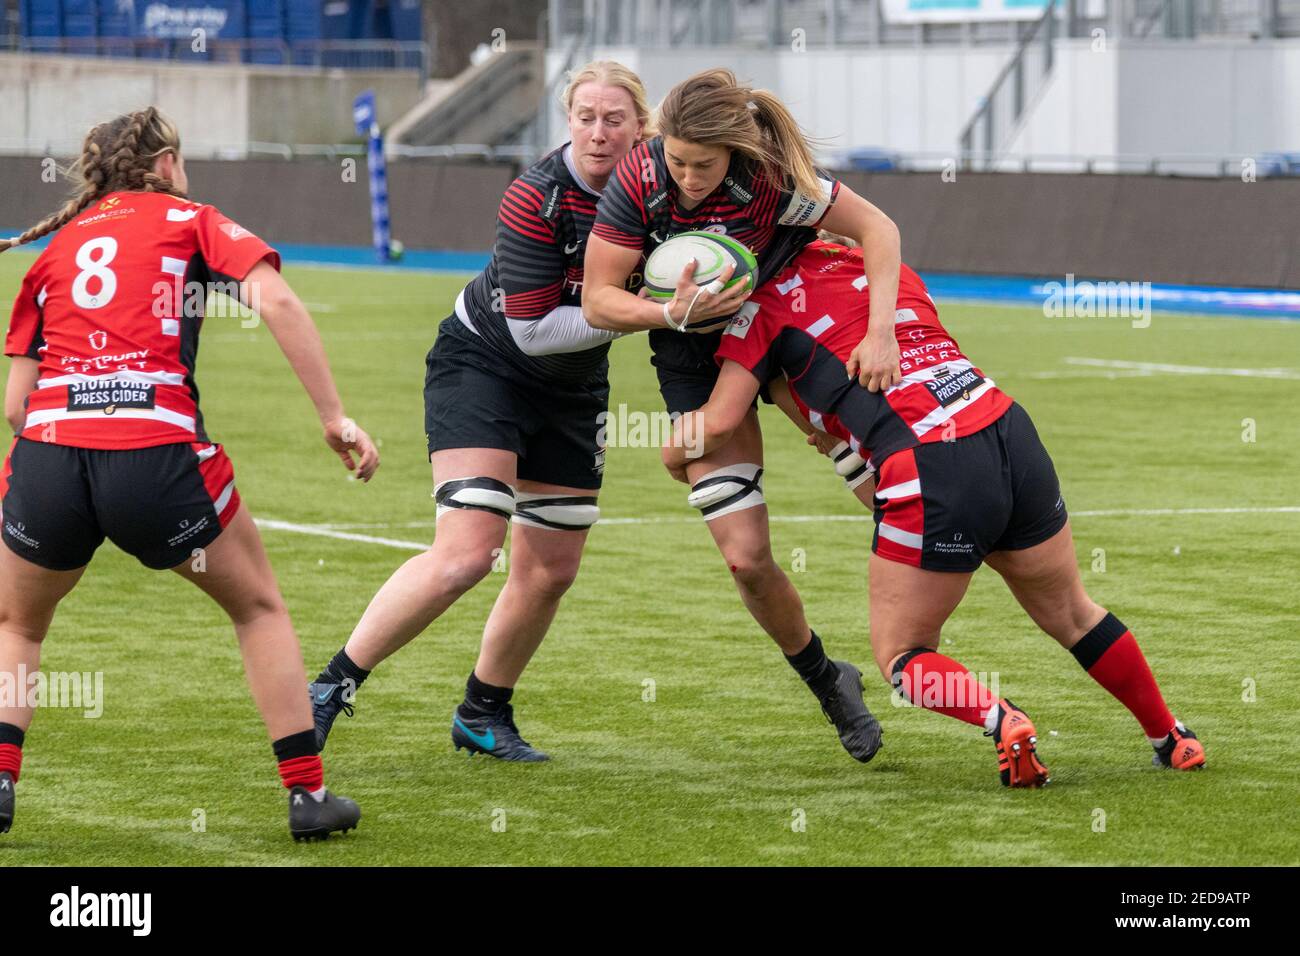 London, UK. 14th Feb, 2021. Sophie De Goede (#4 Saracens Women) being tackled by Kelsey Jones (#2 Gloucester-Hartpury Women) during the Allianz Premier 15s game between Saracens Women and Gloucester Hartpury Women at StoneX Stadium in London, England. Credit: SPP Sport Press Photo. /Alamy Live News Stock Photo